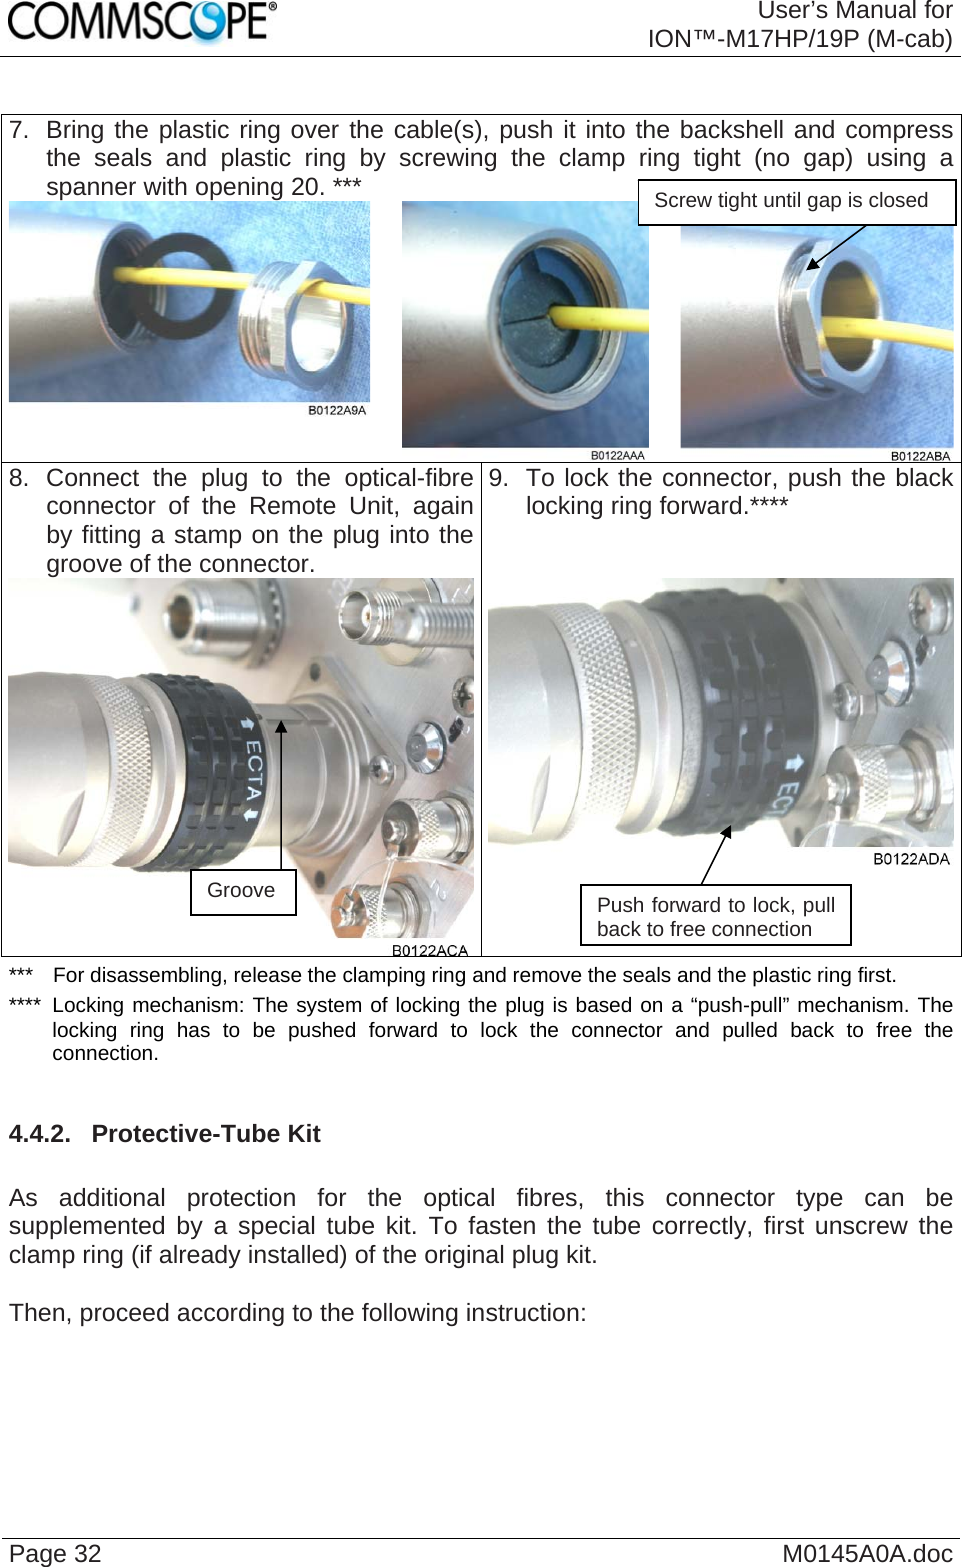  User’s Manual forION™-M17HP/19P (M-cab) Page 32  M0145A0A.doc 7.  Bring the plastic ring over the cable(s), push it into the backshell and compress the seals and plastic ring by screwing the clamp ring tight (no gap) using a spanner with opening 20. ***   8. Connect the plug to the optical-fibre connector of the Remote Unit, again by fitting a stamp on the plug into the groove of the connector.  9.  To lock the connector, push the black locking ring forward.****  Screw tight until gap is closed  ***  For disassembling, release the clamping ring and remove the seals and the plastic ring first. ****  Locking mechanism: The system of locking the plug is based on a “push-pull” mechanism. The locking ring has to be pushed forward to lock the connector and pulled back to free the connection.  4.4.2.  Protective-Tube Kit  As additional protection for the optical fibres, this connector type can be supplemented by a special tube kit. To fasten the tube correctly, first unscrew the clamp ring (if already installed) of the original plug kit.   Then, proceed according to the following instruction:   Groove  Push forward to lock, pull back to free connection 